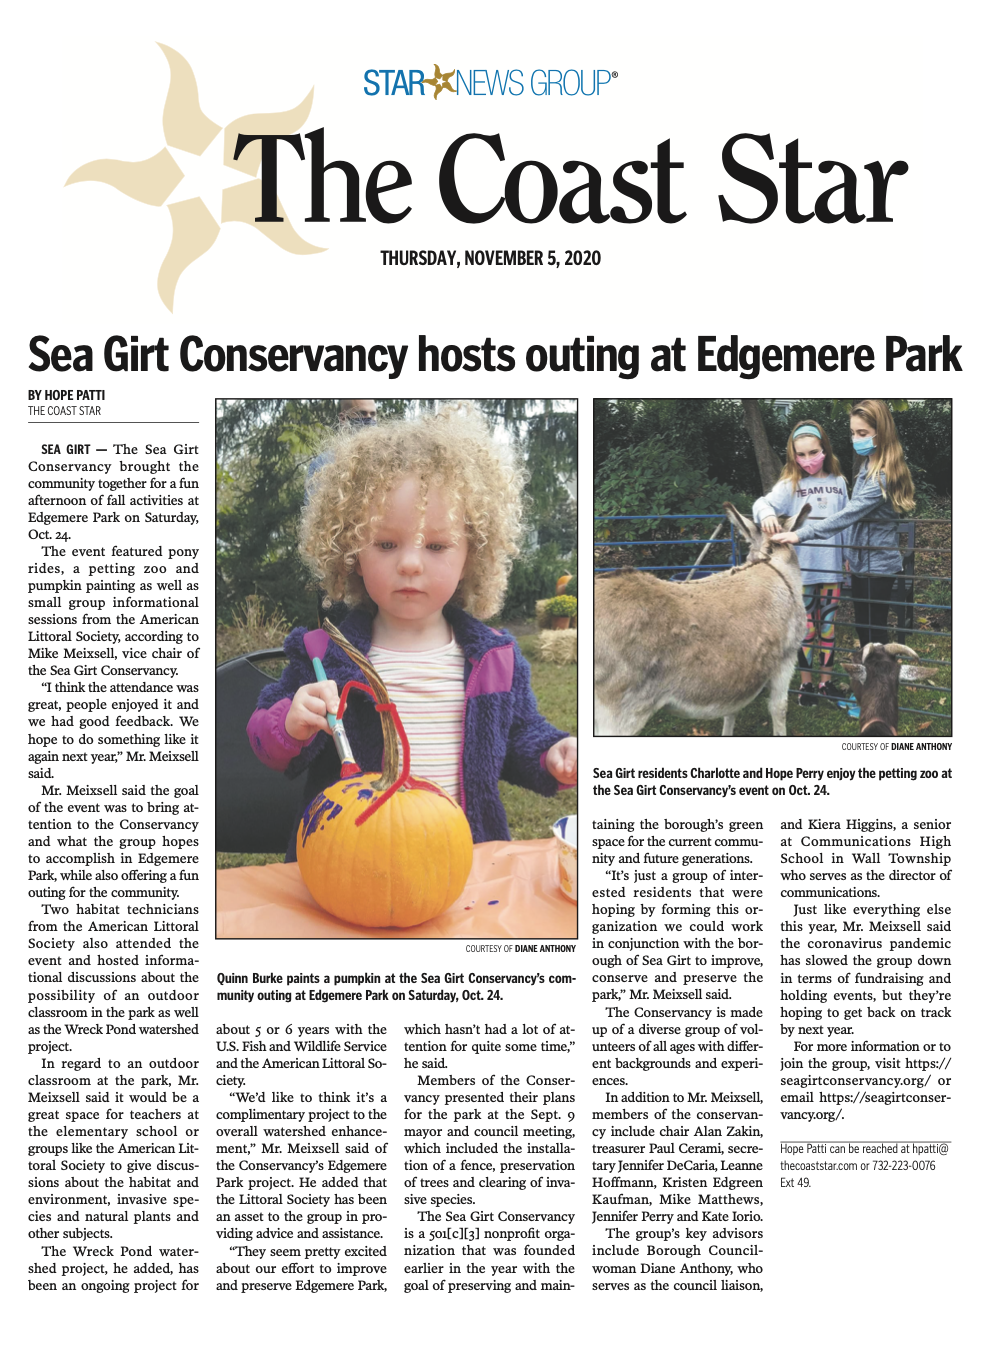 Sea Girt Conservancy Hosts Outing at Edgemere Park originally posted by the Coast Star